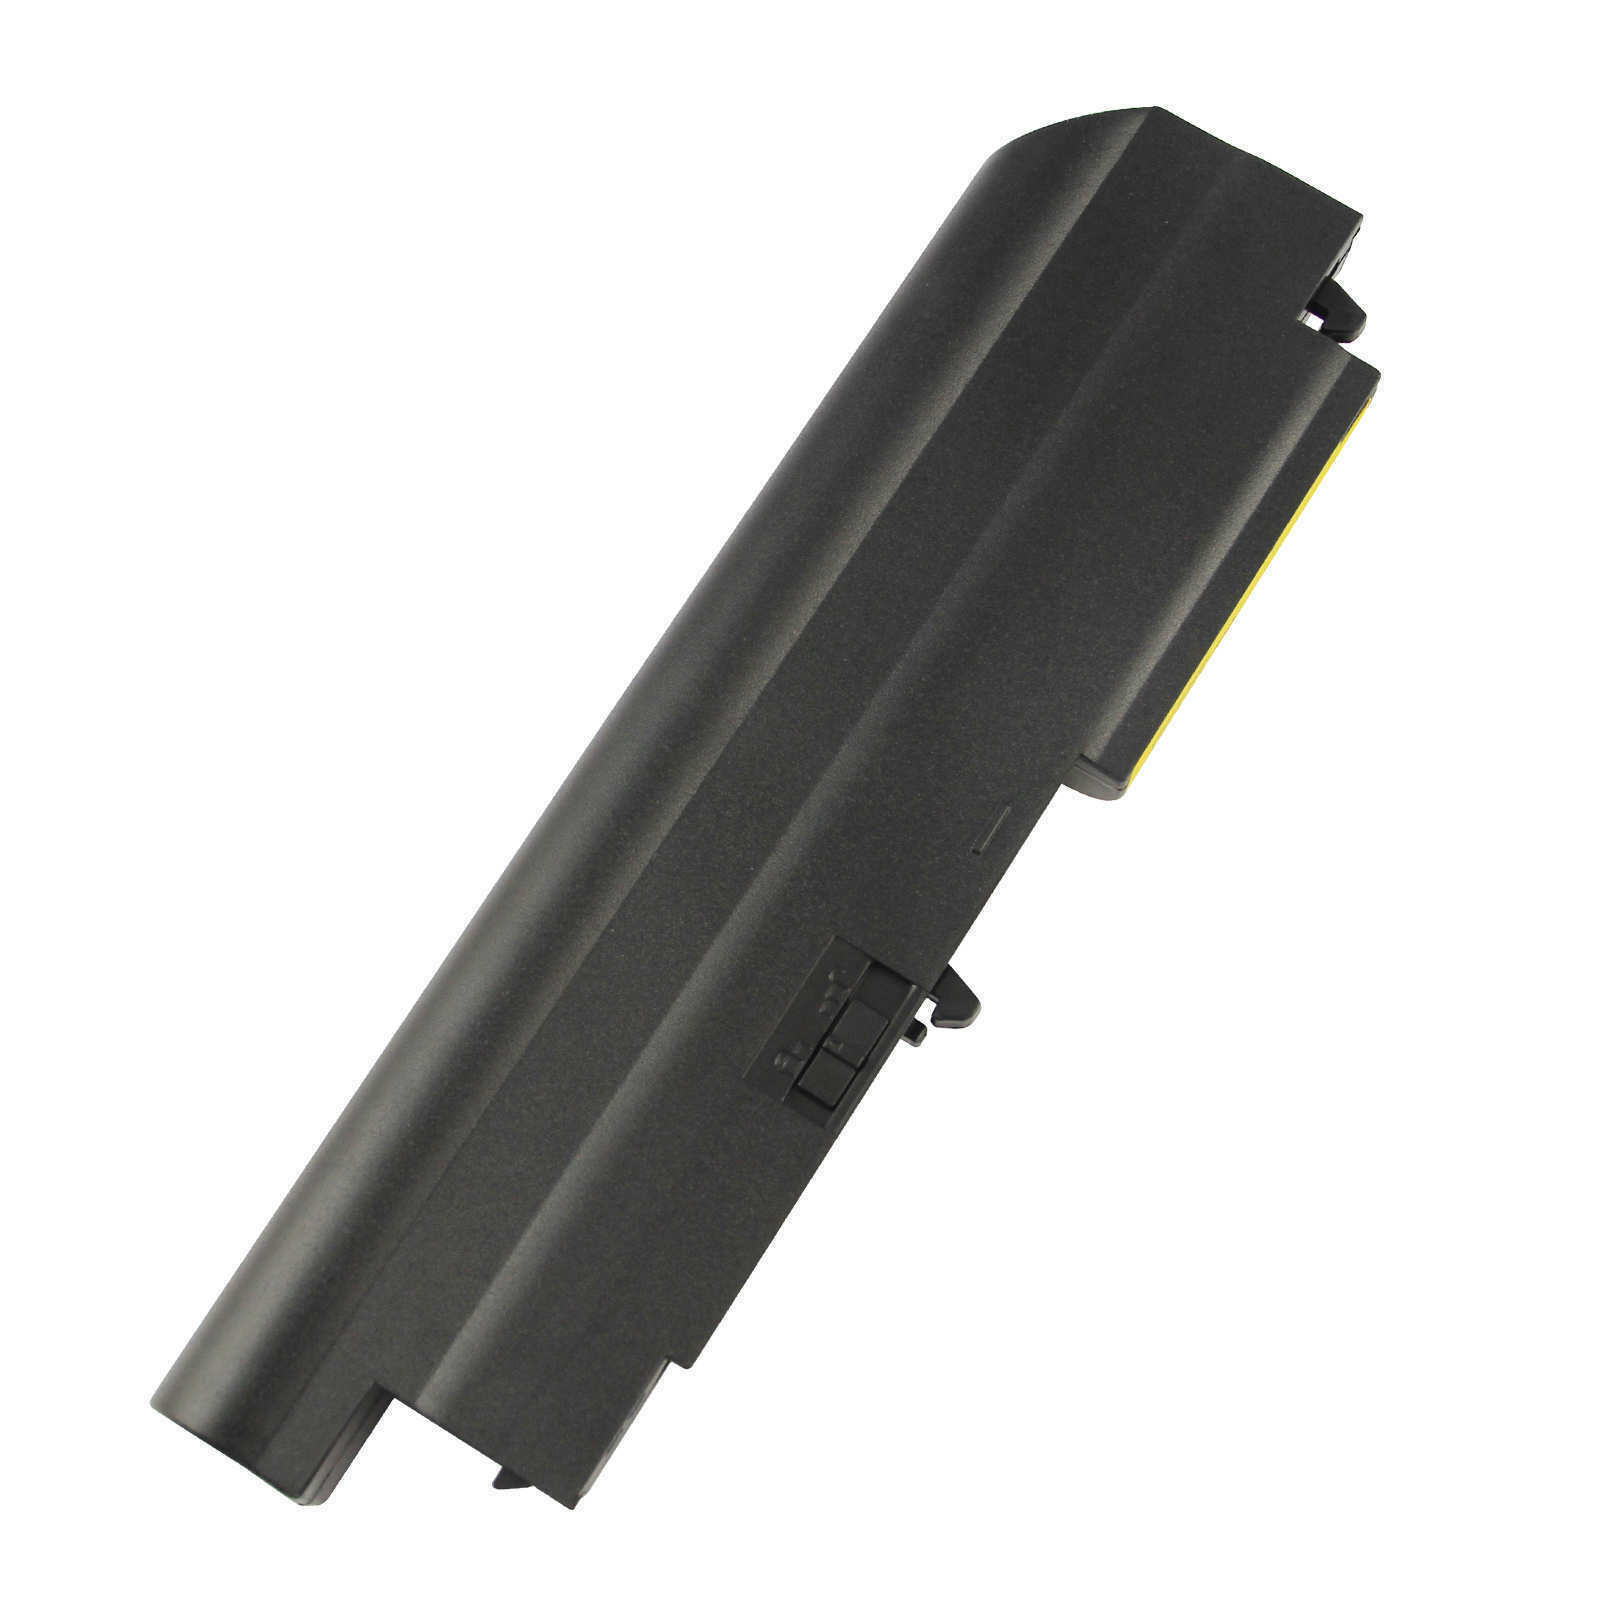 41U3198 Battery for Lenovo ThinkPad R61 T61 T400 R400 Series 14.1" Widescreen - image 4 of 5